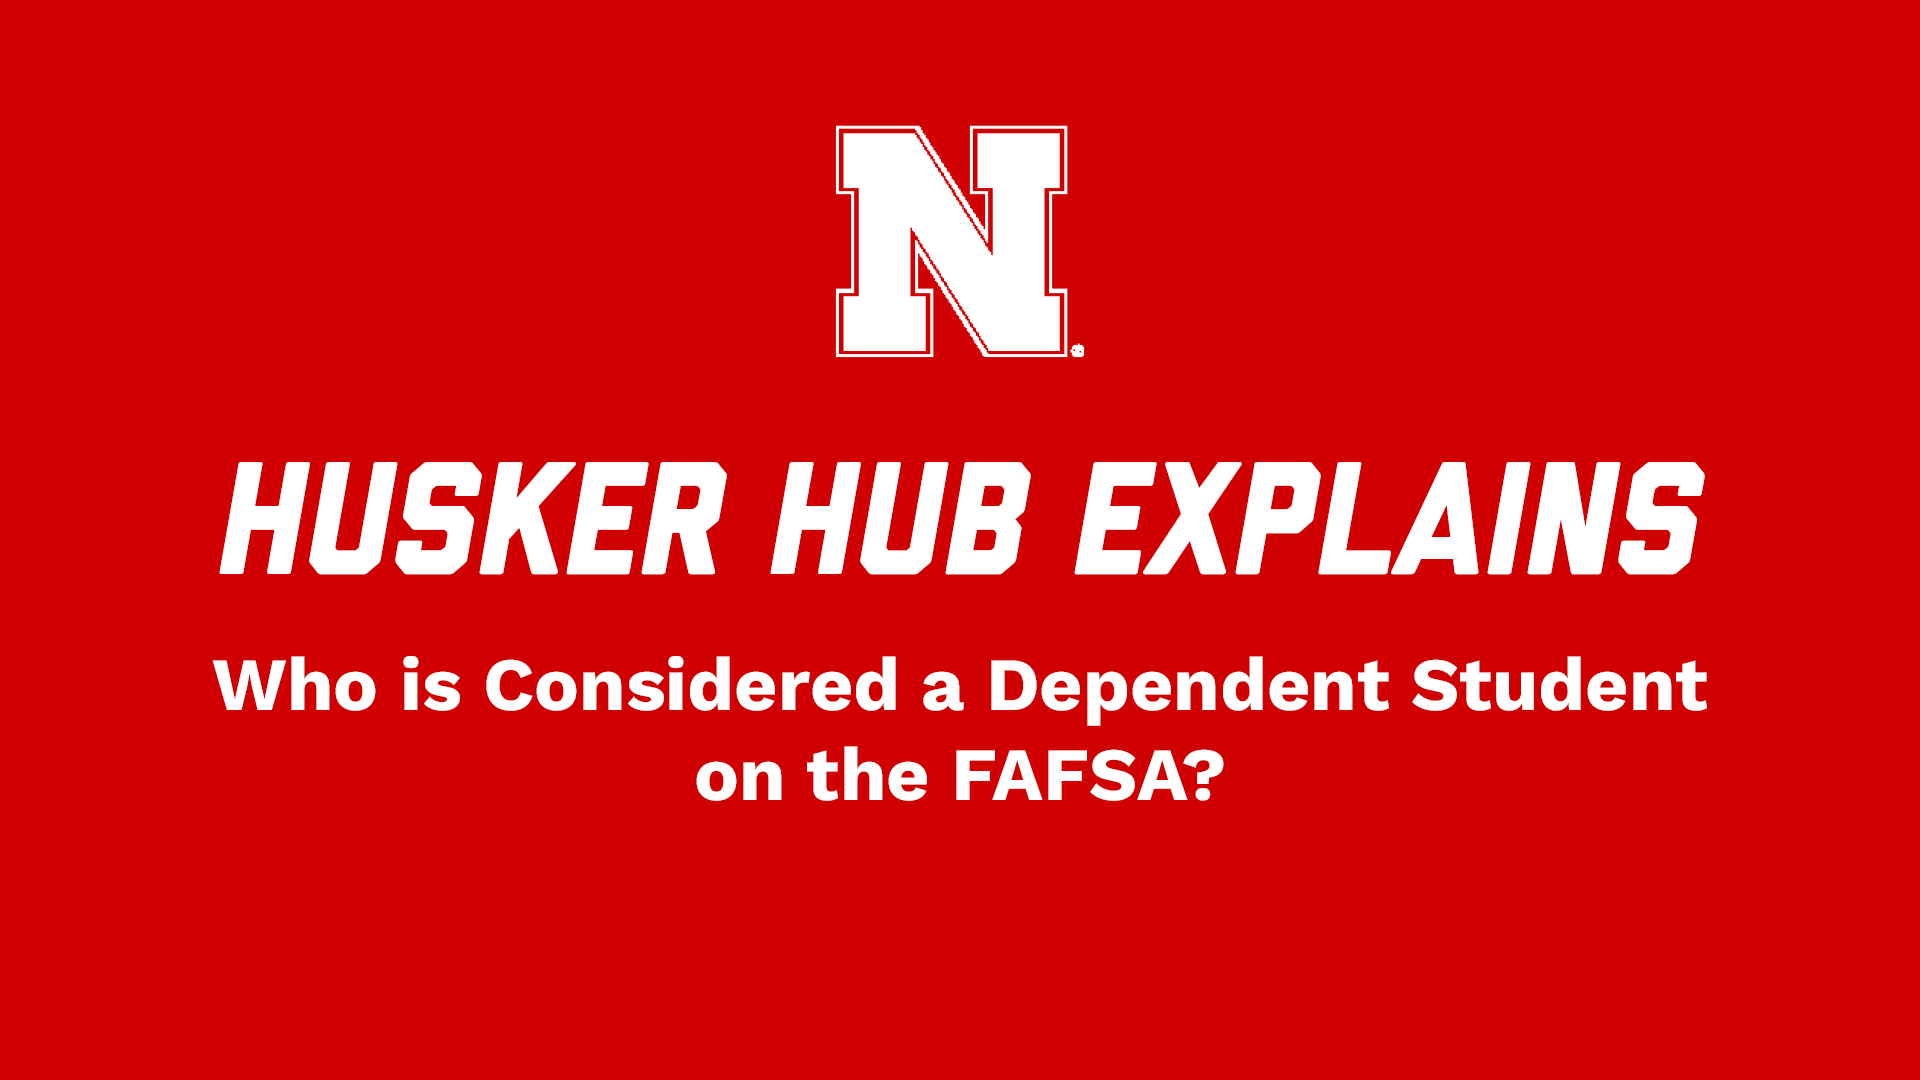 Husker Hub Explains: Who is Considered a Dependent Student on the FAFSA?